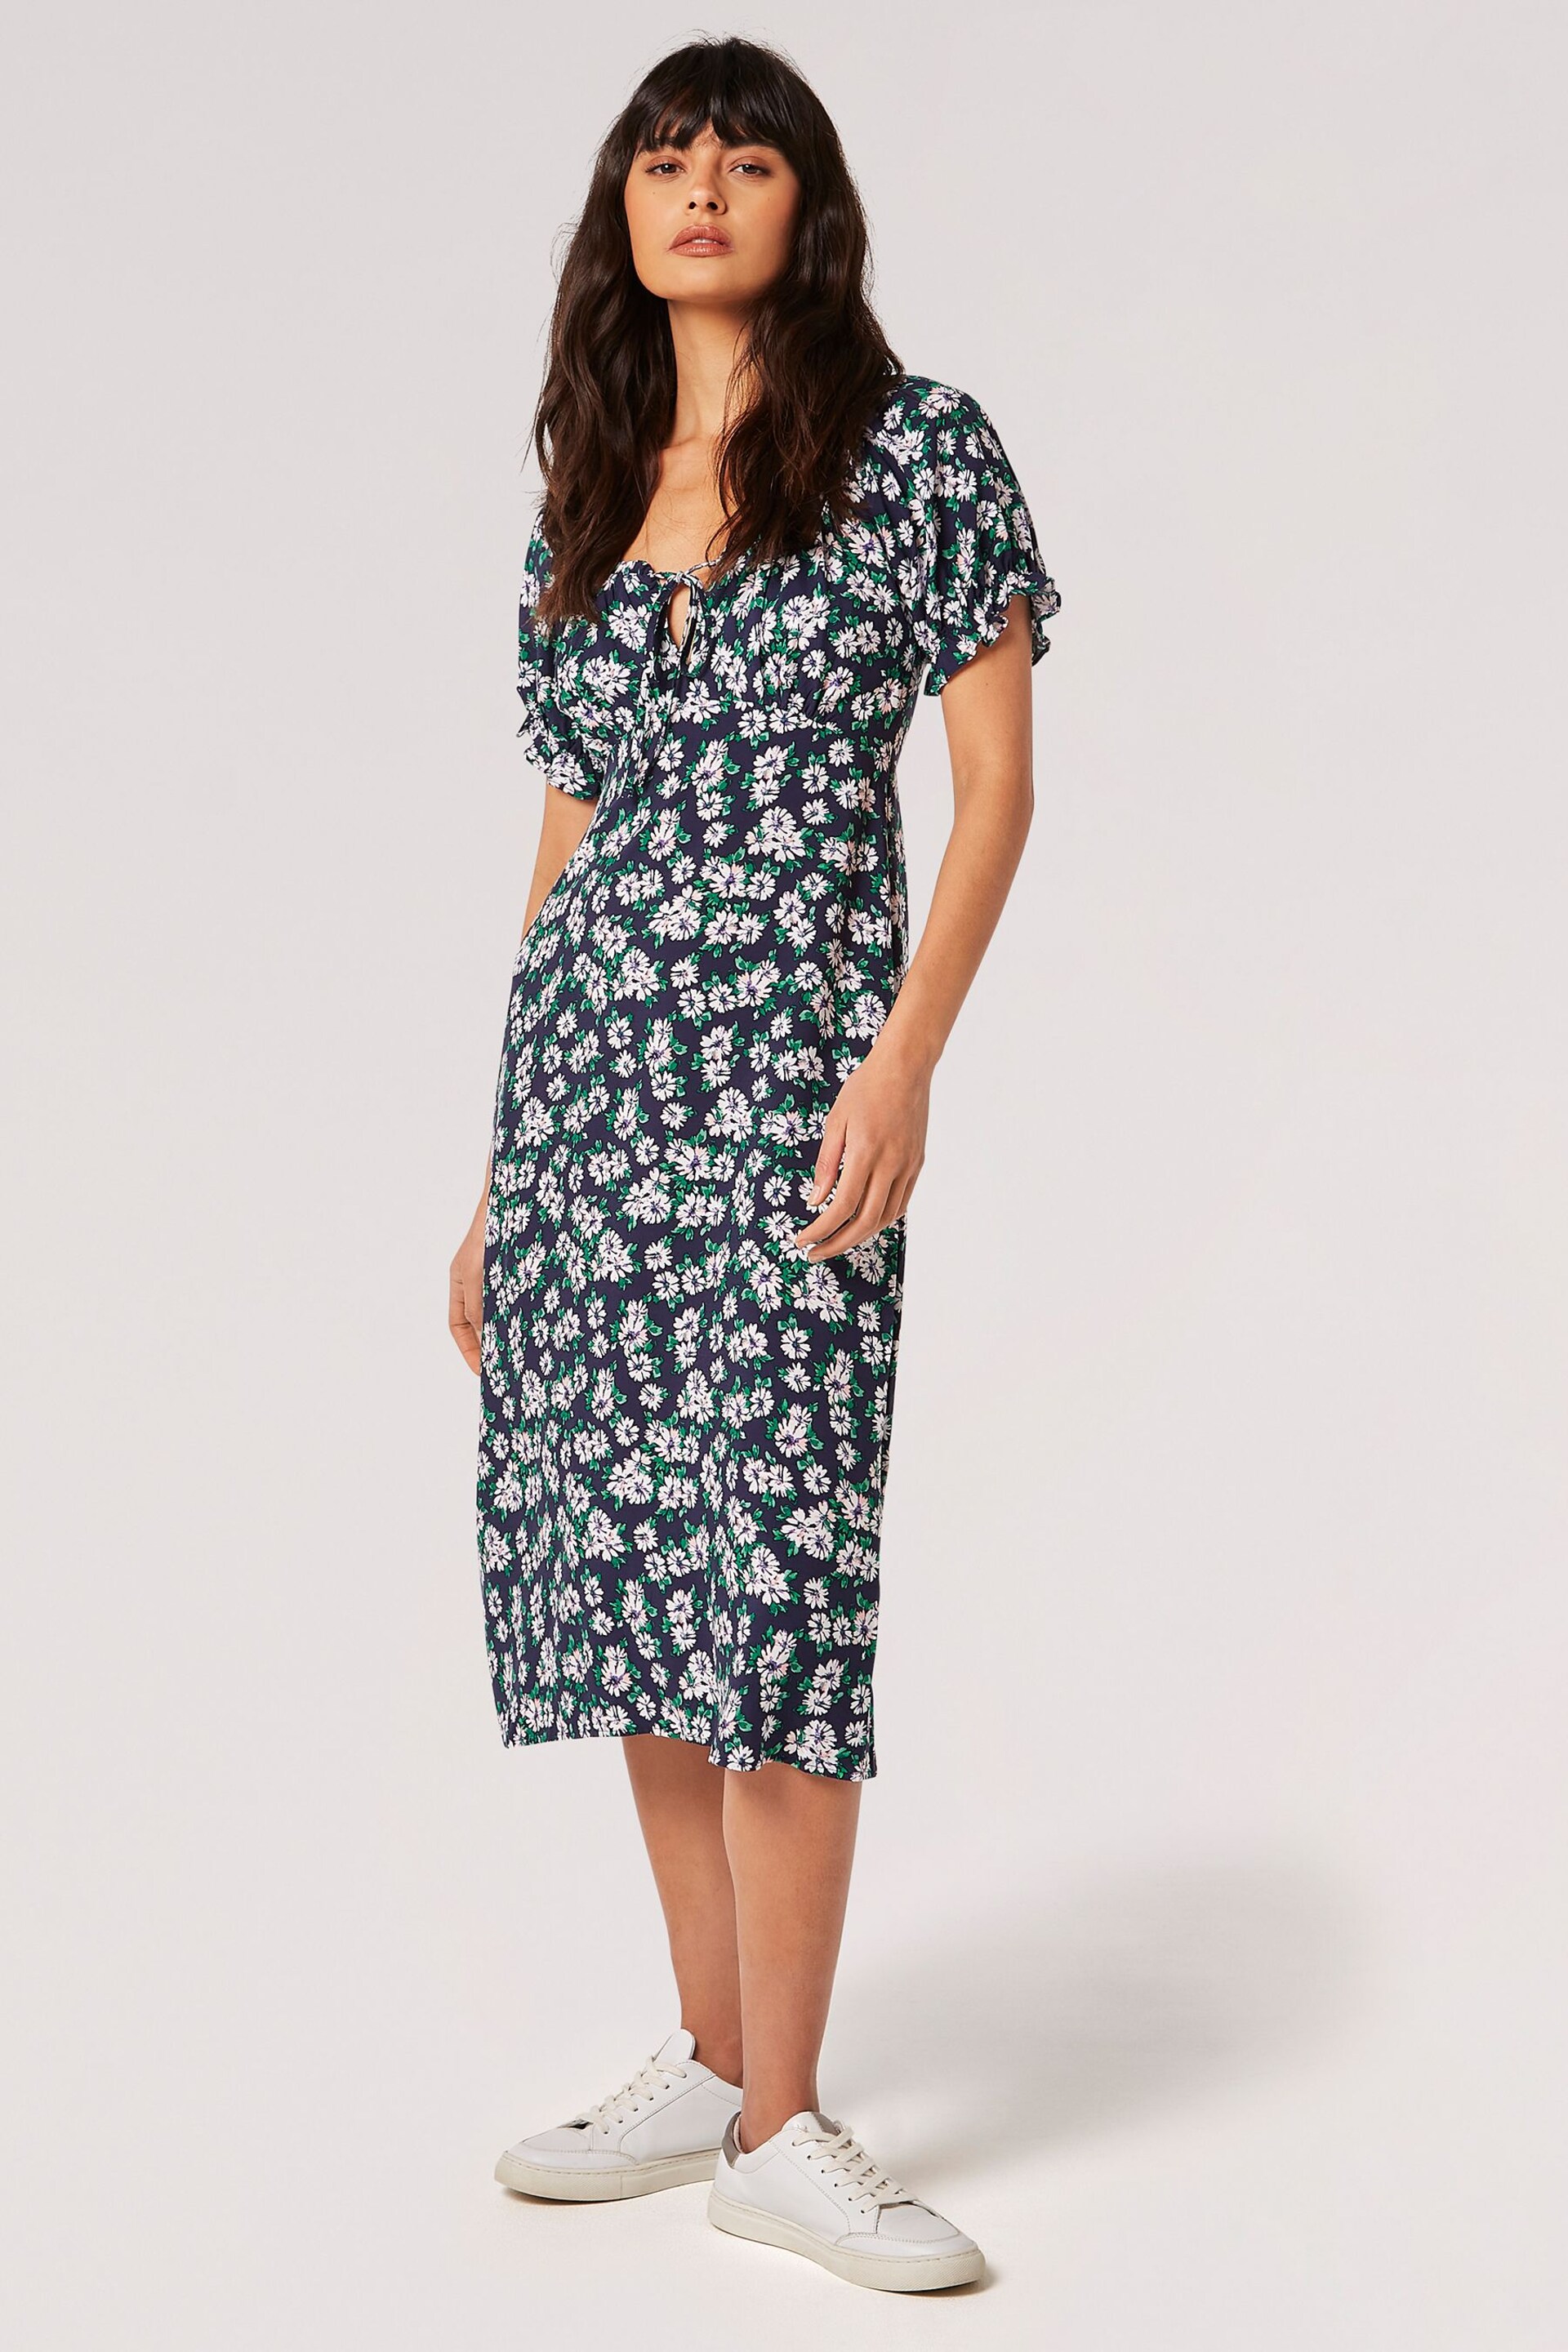 Apricot Blue Daisy Floral Midi Dress - Image 1 of 4